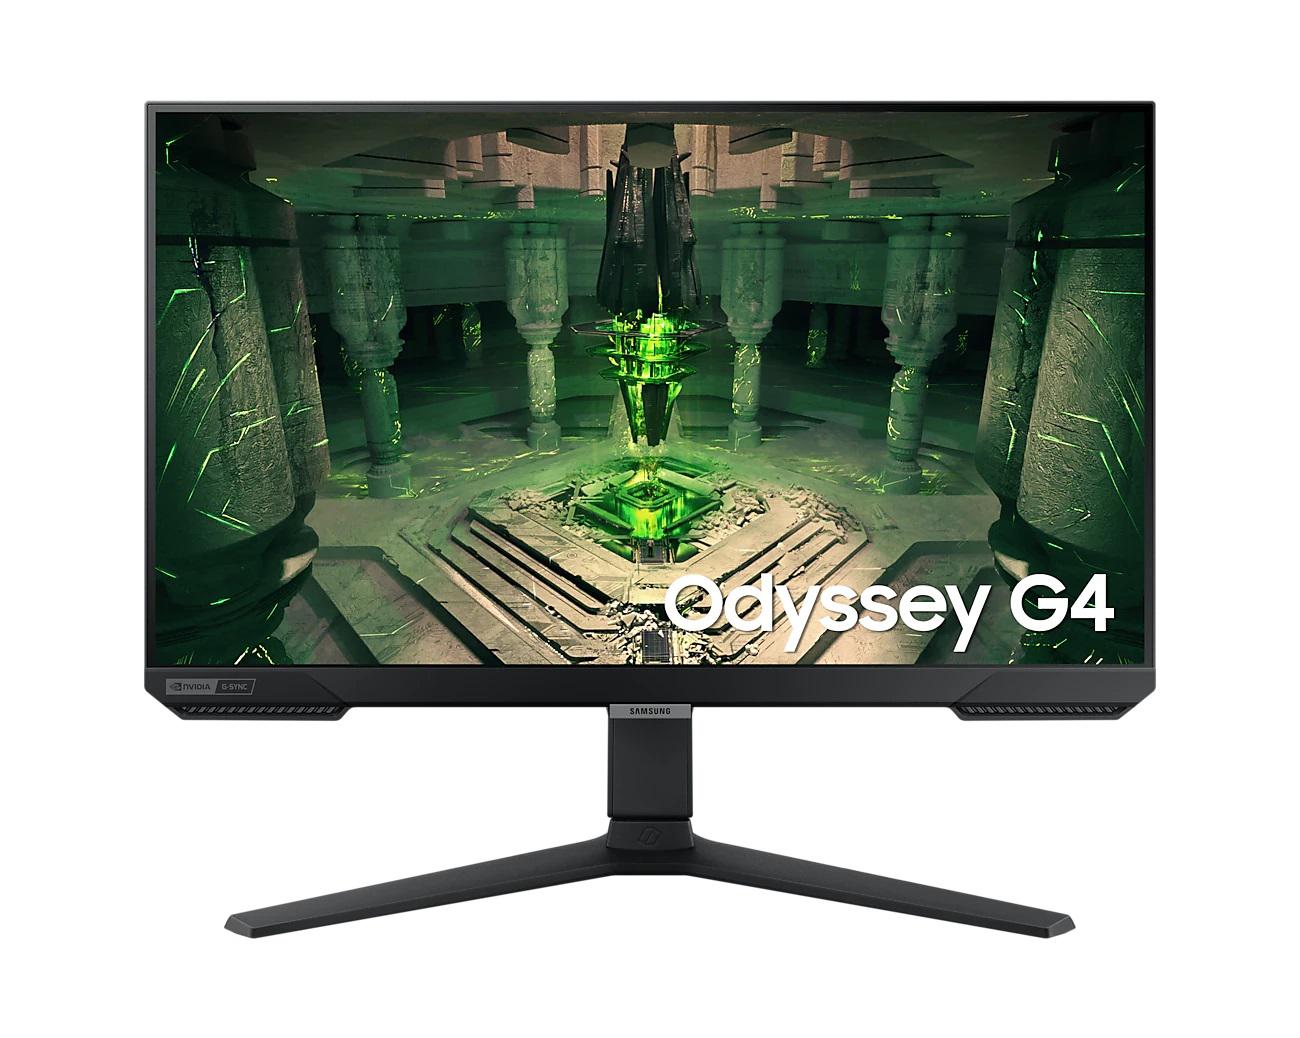 MONITOR SAMSUNG LS25BG400EUXEN 25 inch, Curvature: FLAT , Panel Type:IPS, Resolution: 1920 x 1080, Aspect Ratio: 16:9, Refresh Rate: 240Hz,Response time GtG: 1 ms, Brightness: 400 cd/m², Contrast (static): 1000: 1, Contrast (dynamic): Mega DCR, Viewing angle: 178°/178°, Color Gamut(NTSC/sRGB/Adobe